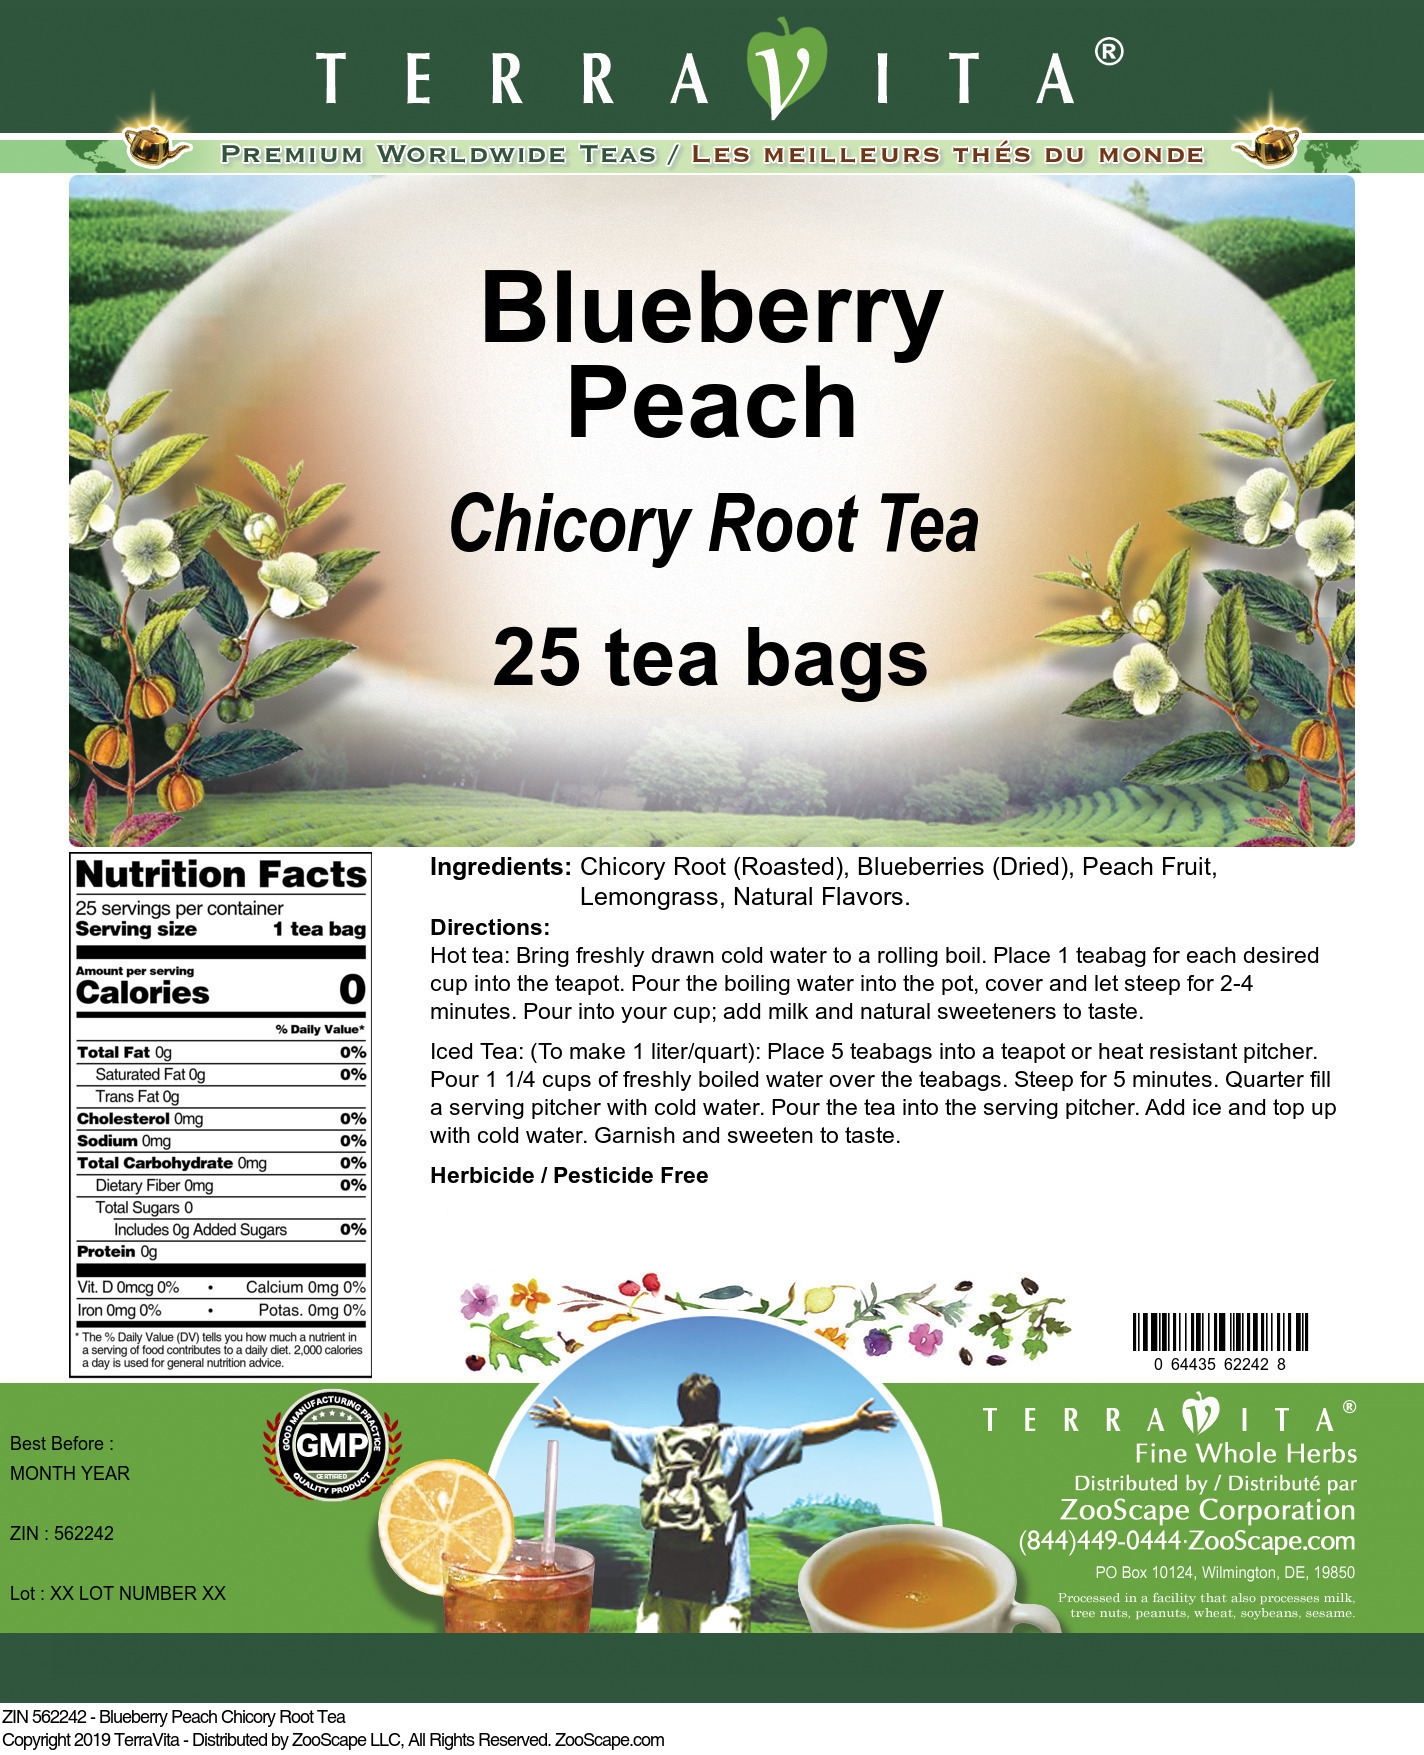 Blueberry Peach Chicory Root Tea - Label